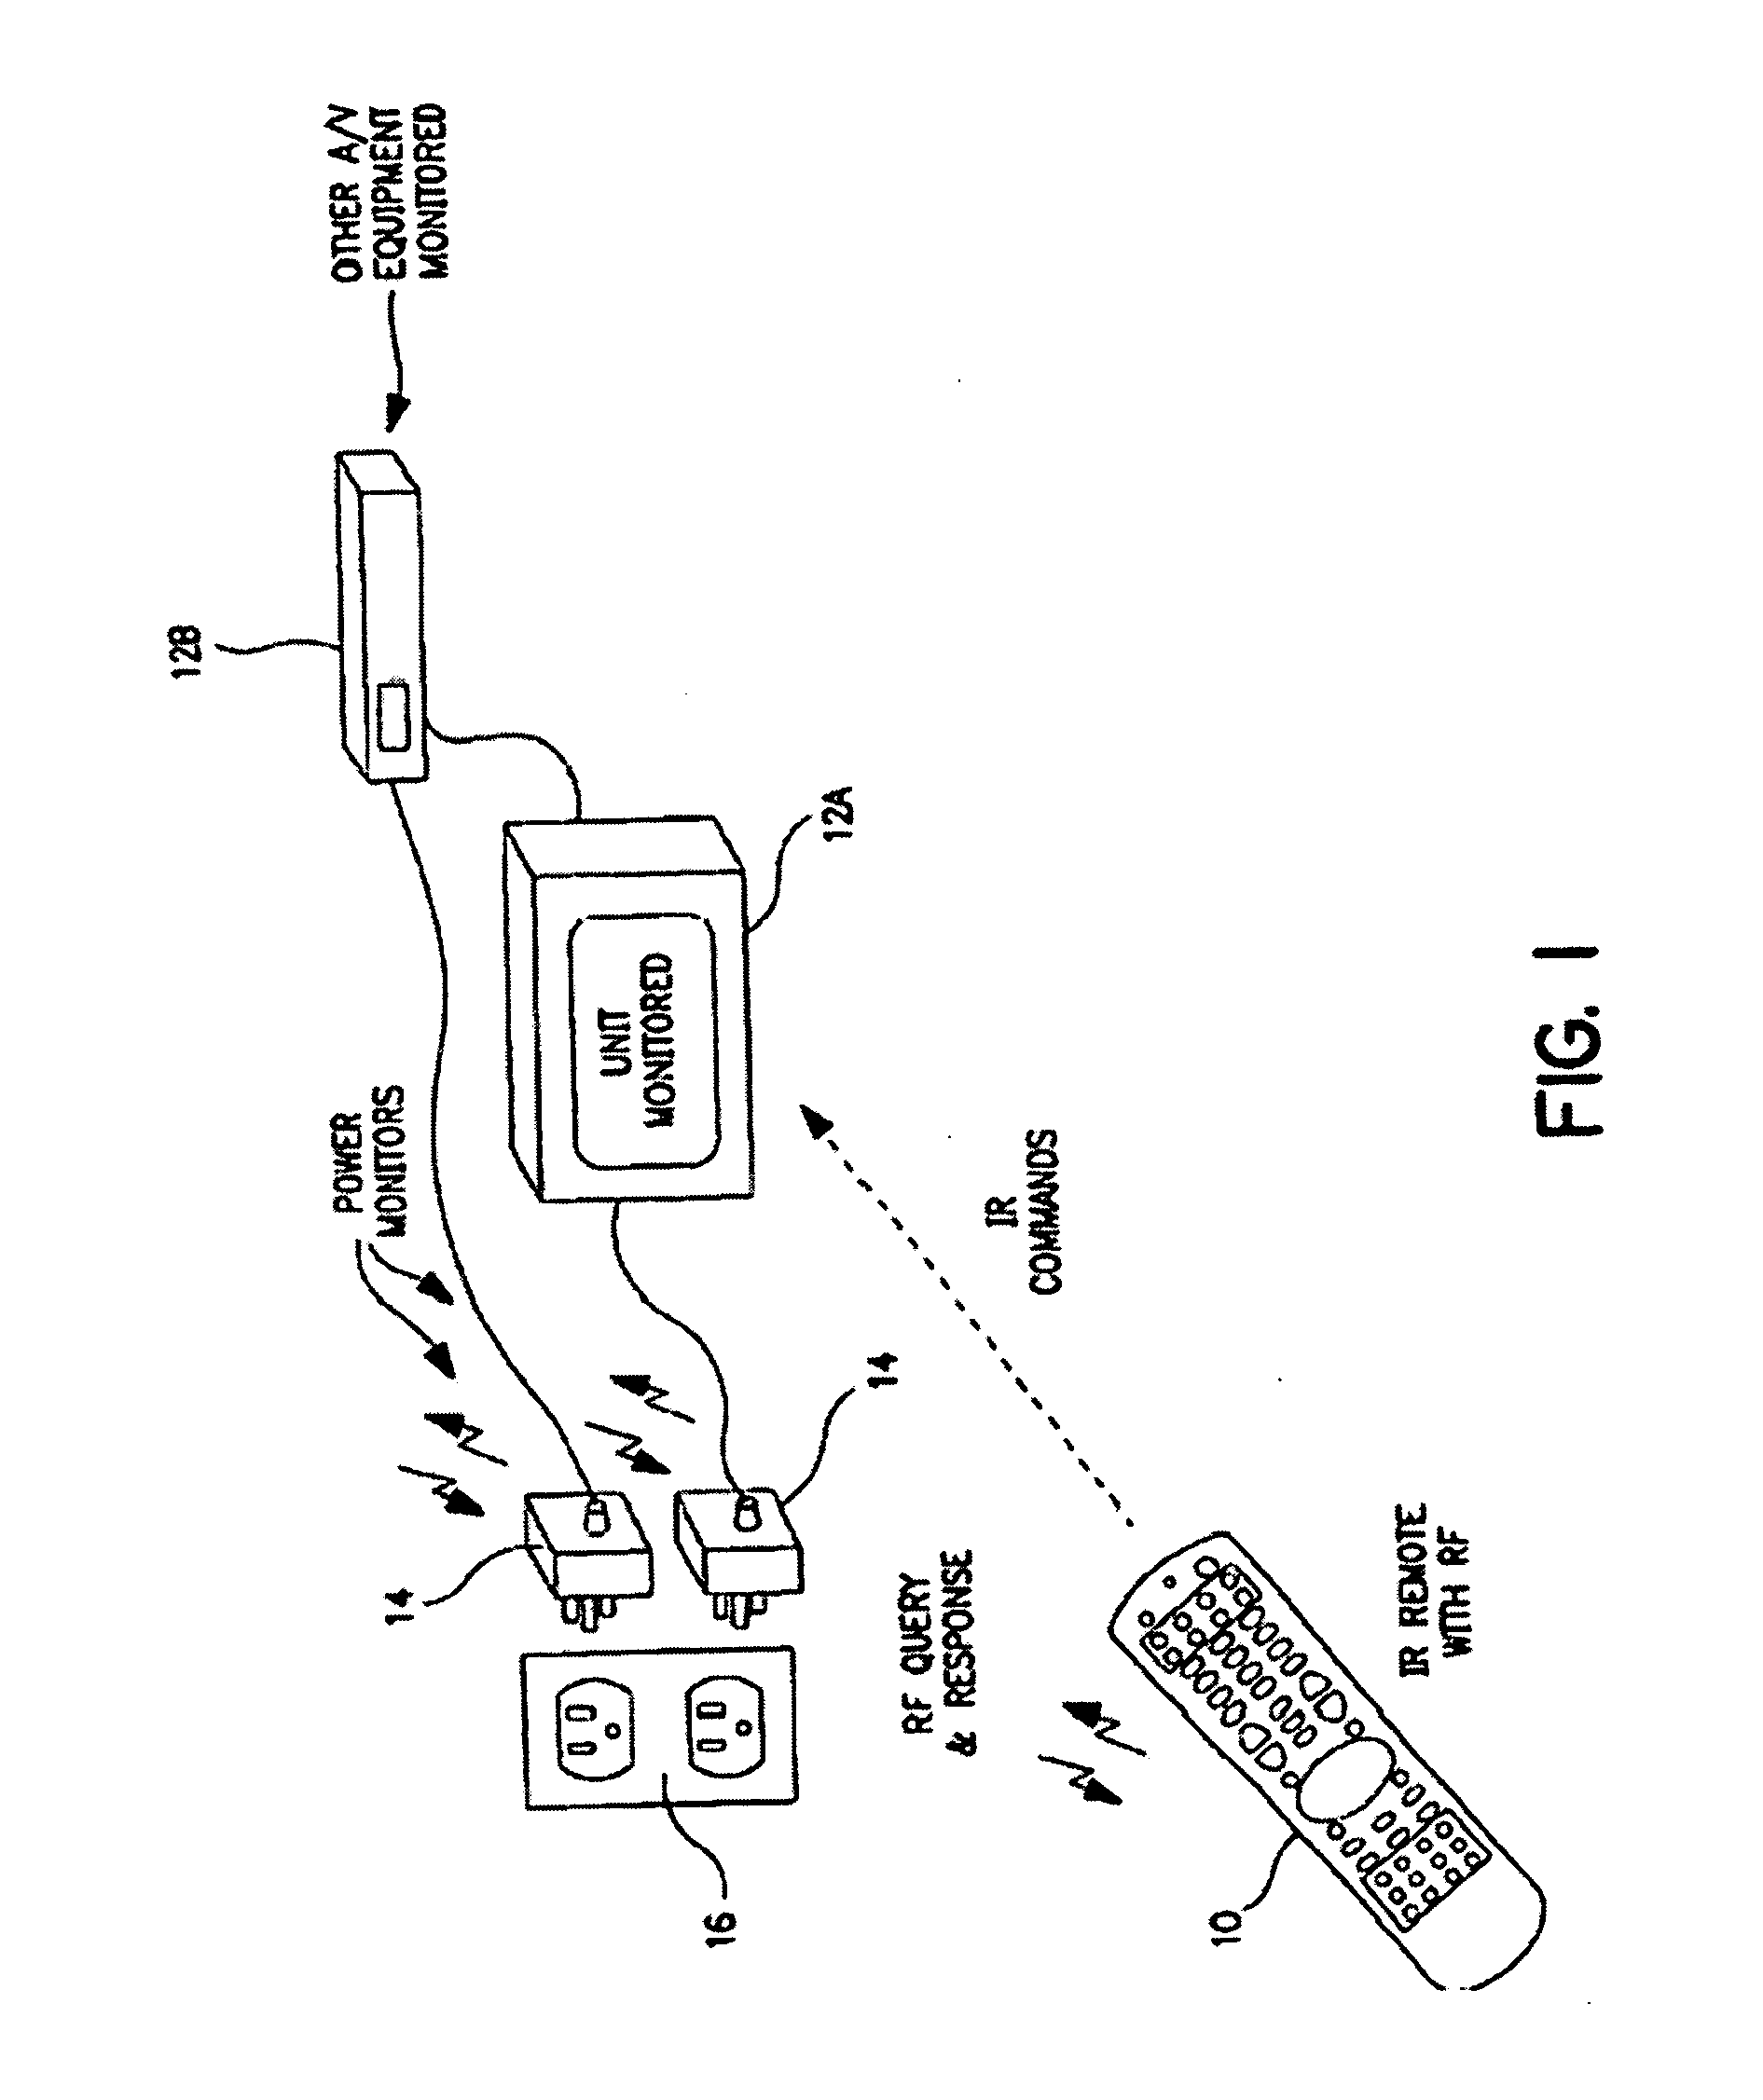 Power strip with control and monitoring functionality